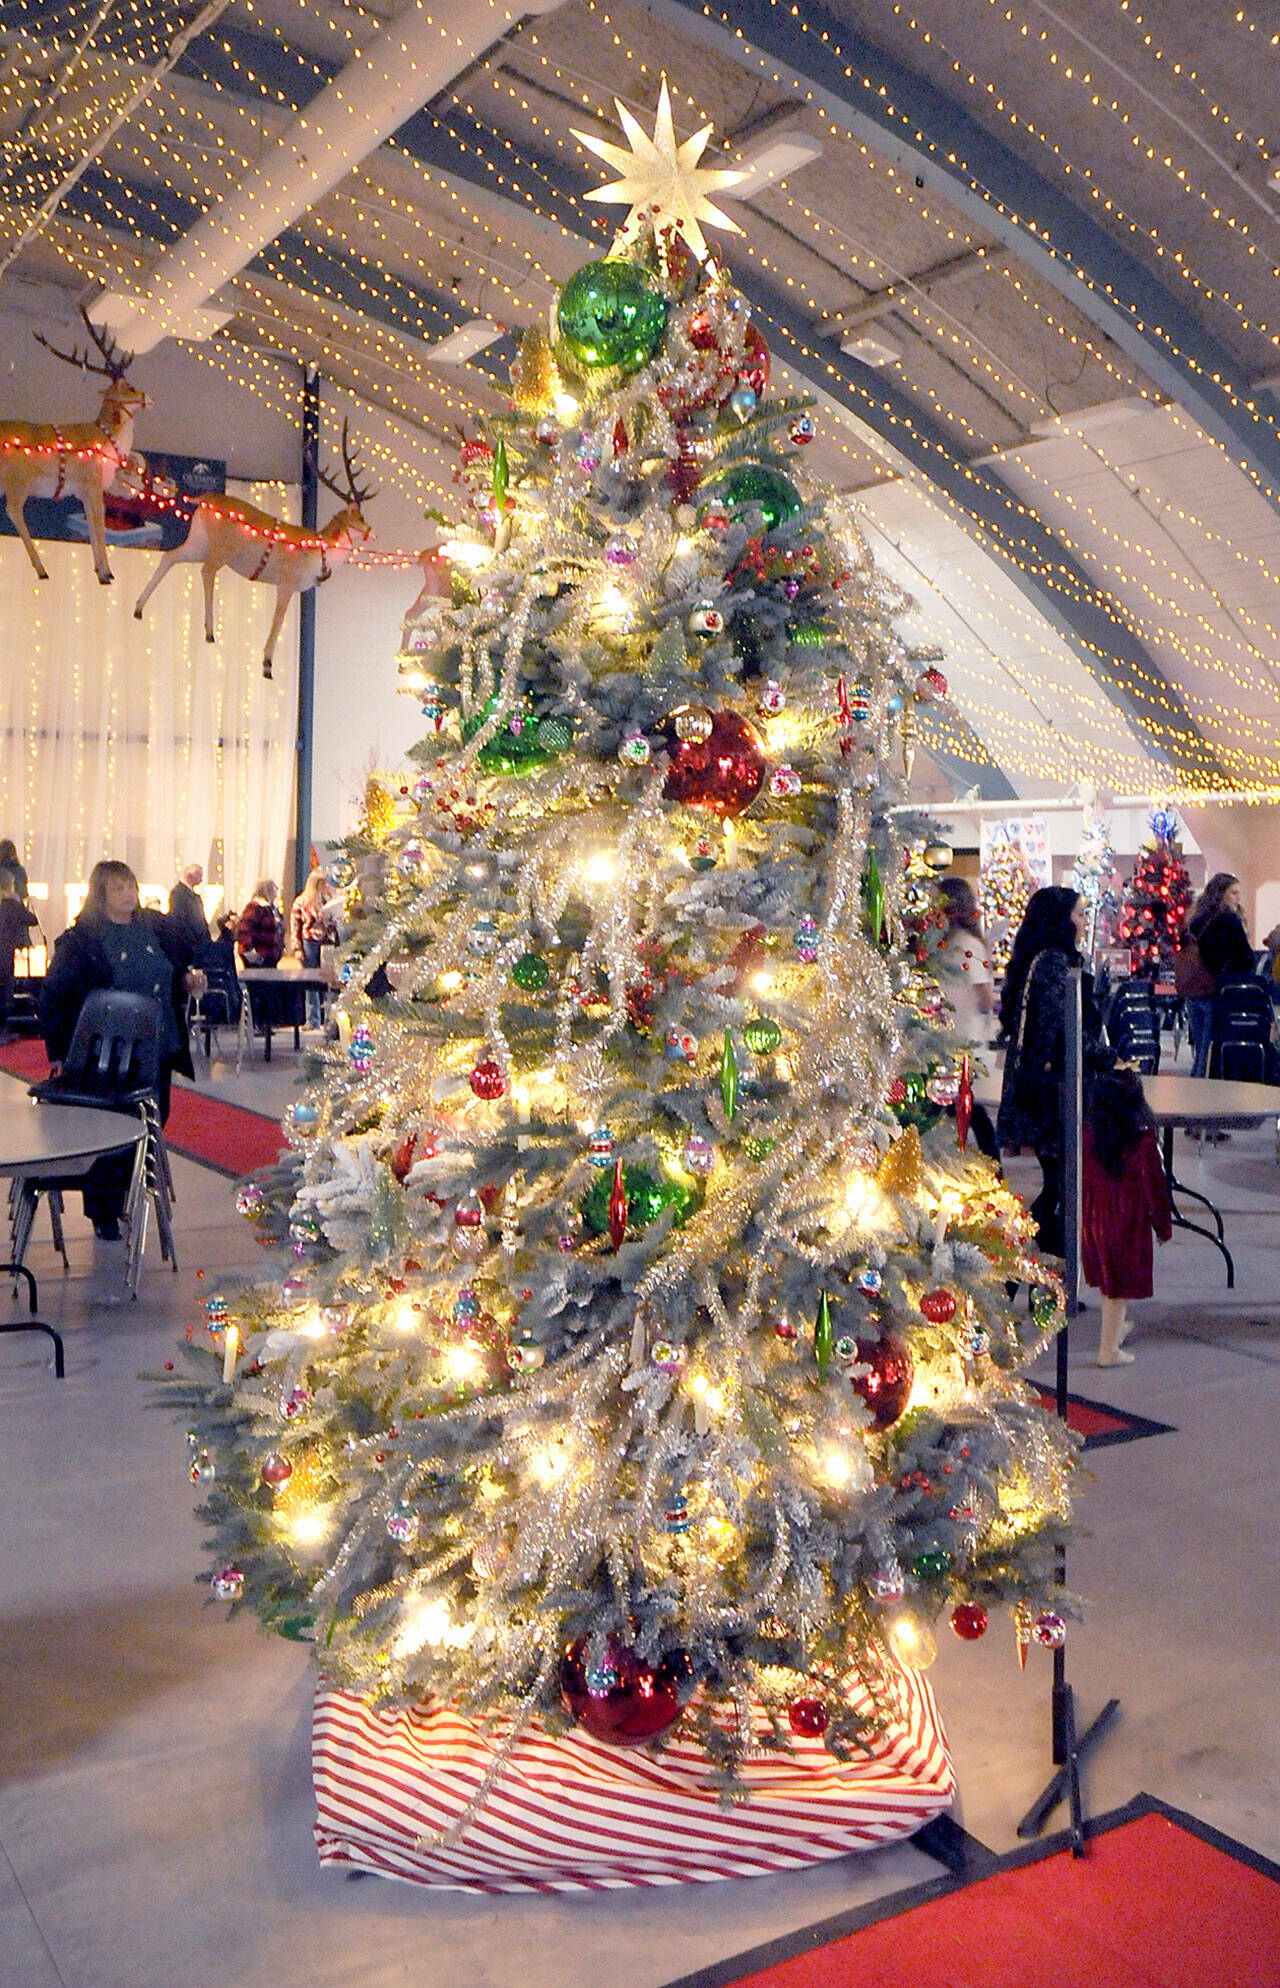 A decorated Christmas tree titled “Take Me Back” stands at Vern Burton Community Center in Port Angeles on Saturday after fetching the top bid of $7,500 offered by the Jamestown S’Klallam Tribe during Saturday night’s Festival of Trees gala auction. The tree, designed by Staci Politik and sponsored by Applebee’s Restaurant, included a $2,000 premium gift certificate for home furnishings from Angeles Furniture. More than 40 trees were auctioned off on Friday as a benefit for the Olympic Medical Center Foundation. (Keith Thorpe/Peninsula Daily News)